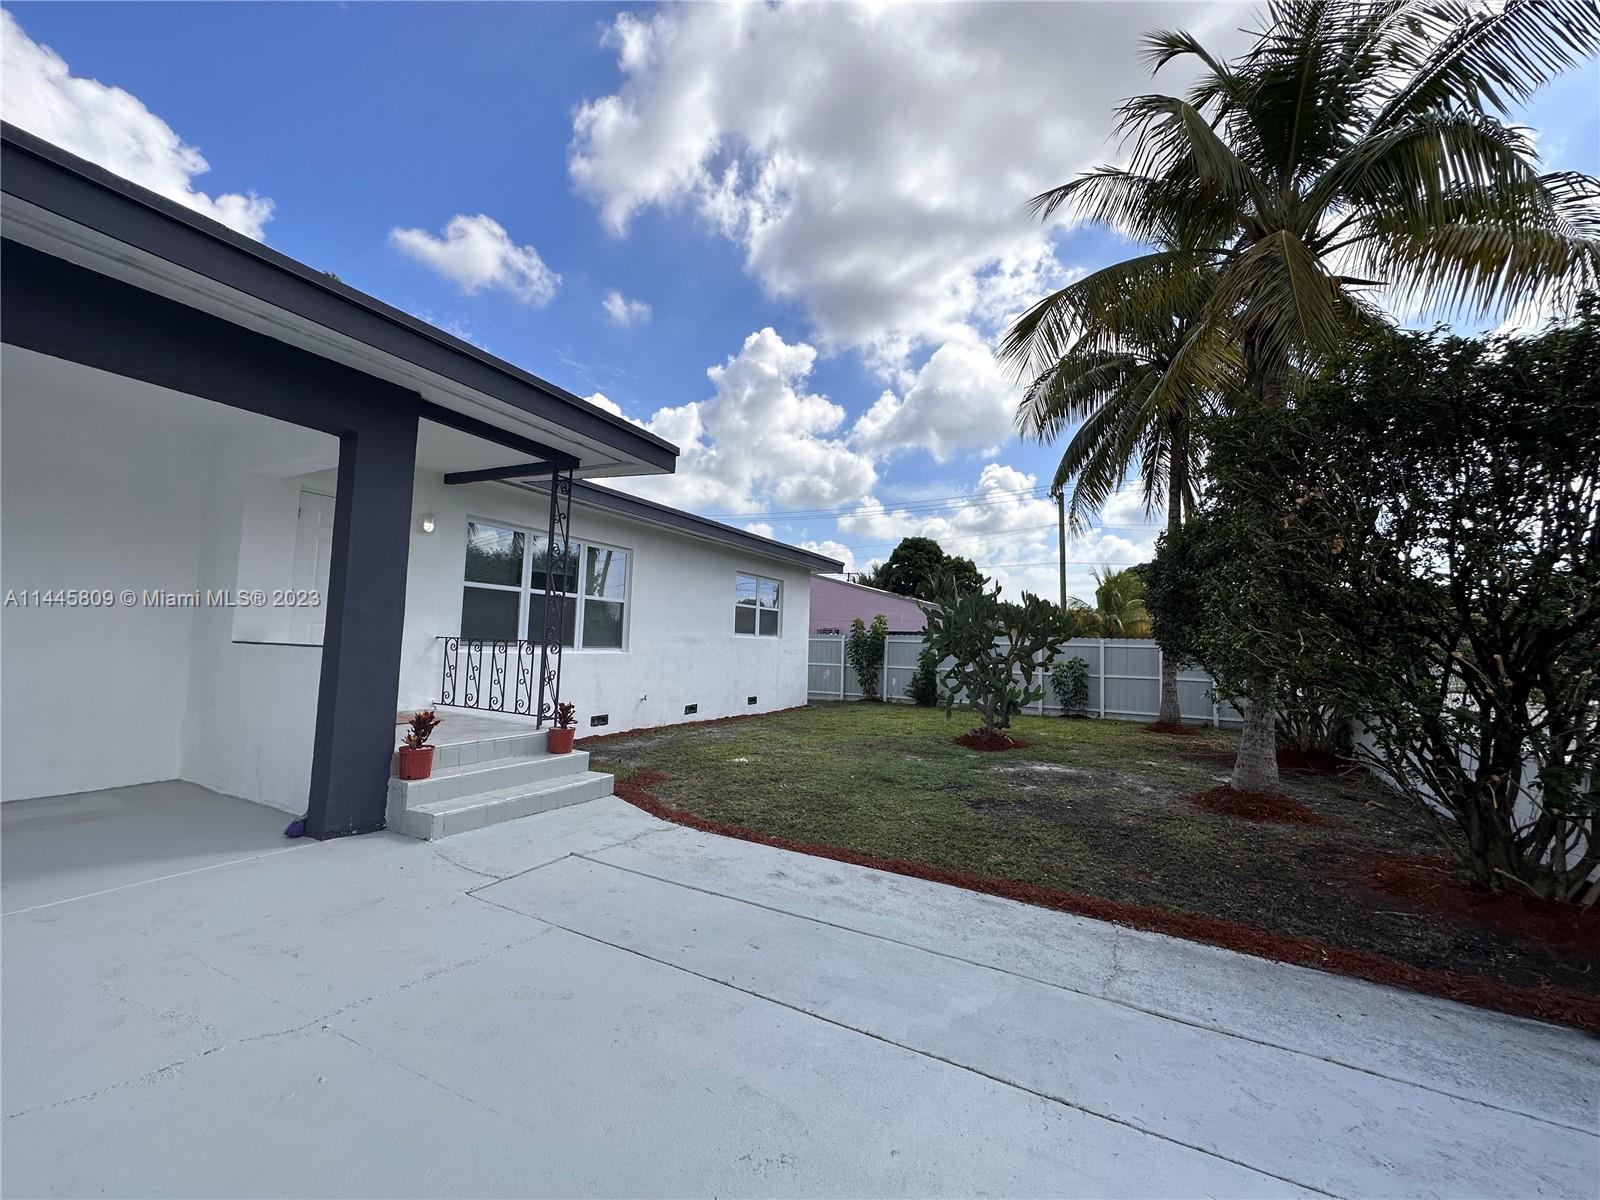 Photo 2 of 1411 NW 118th St in Miami - MLS A11445809